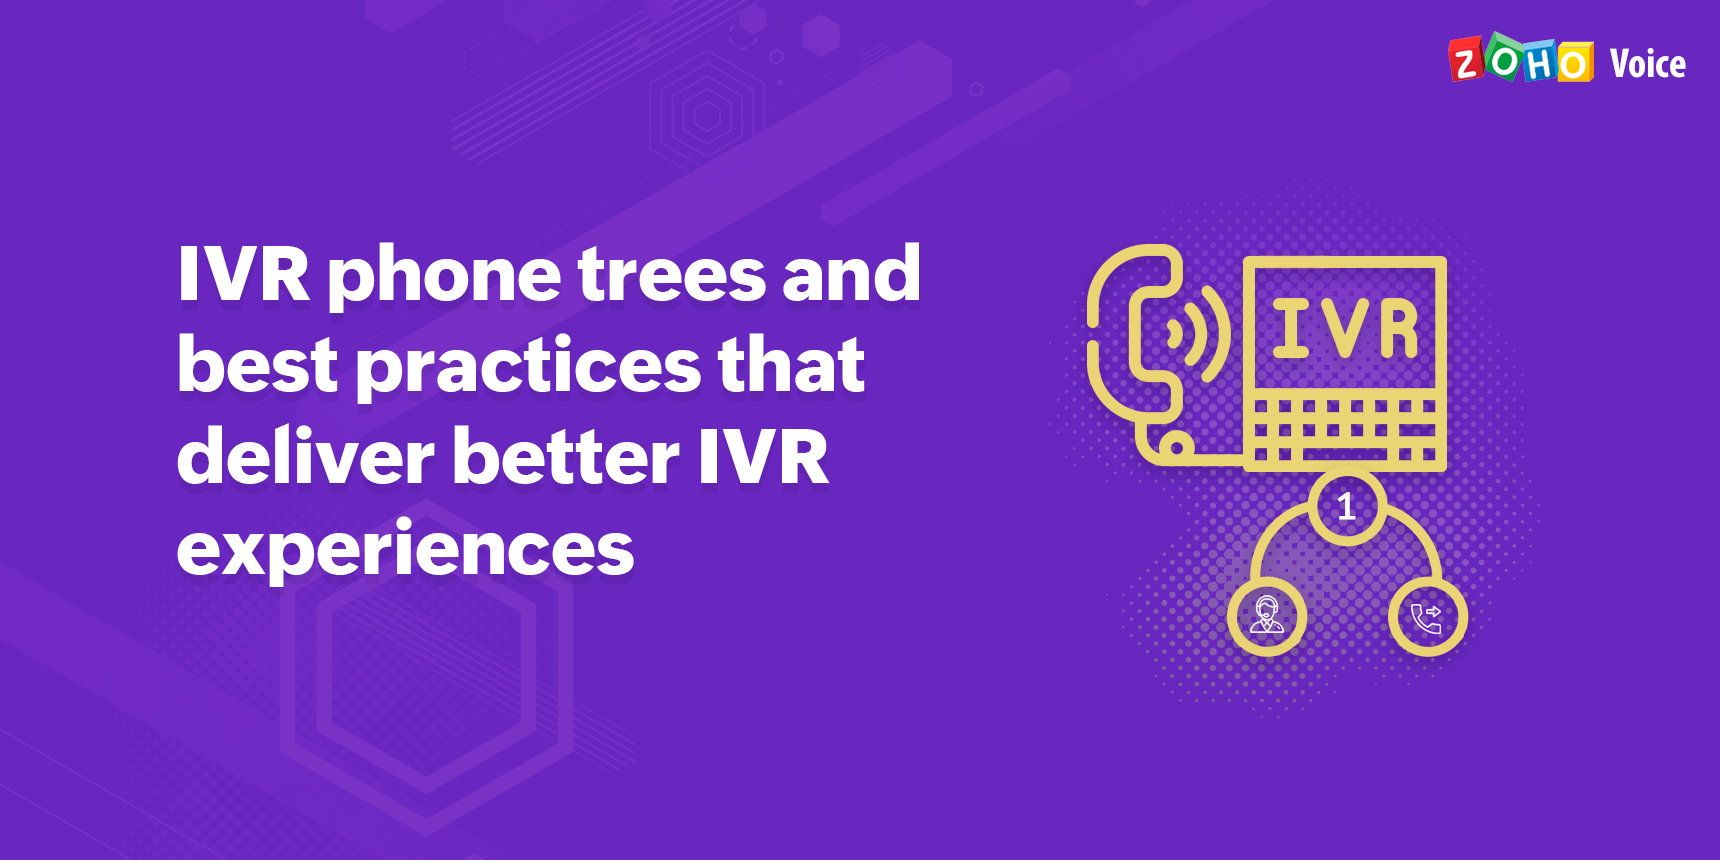 Deploy IVR phone trees to propel customer interactions to quick resolution with Zoho Voice